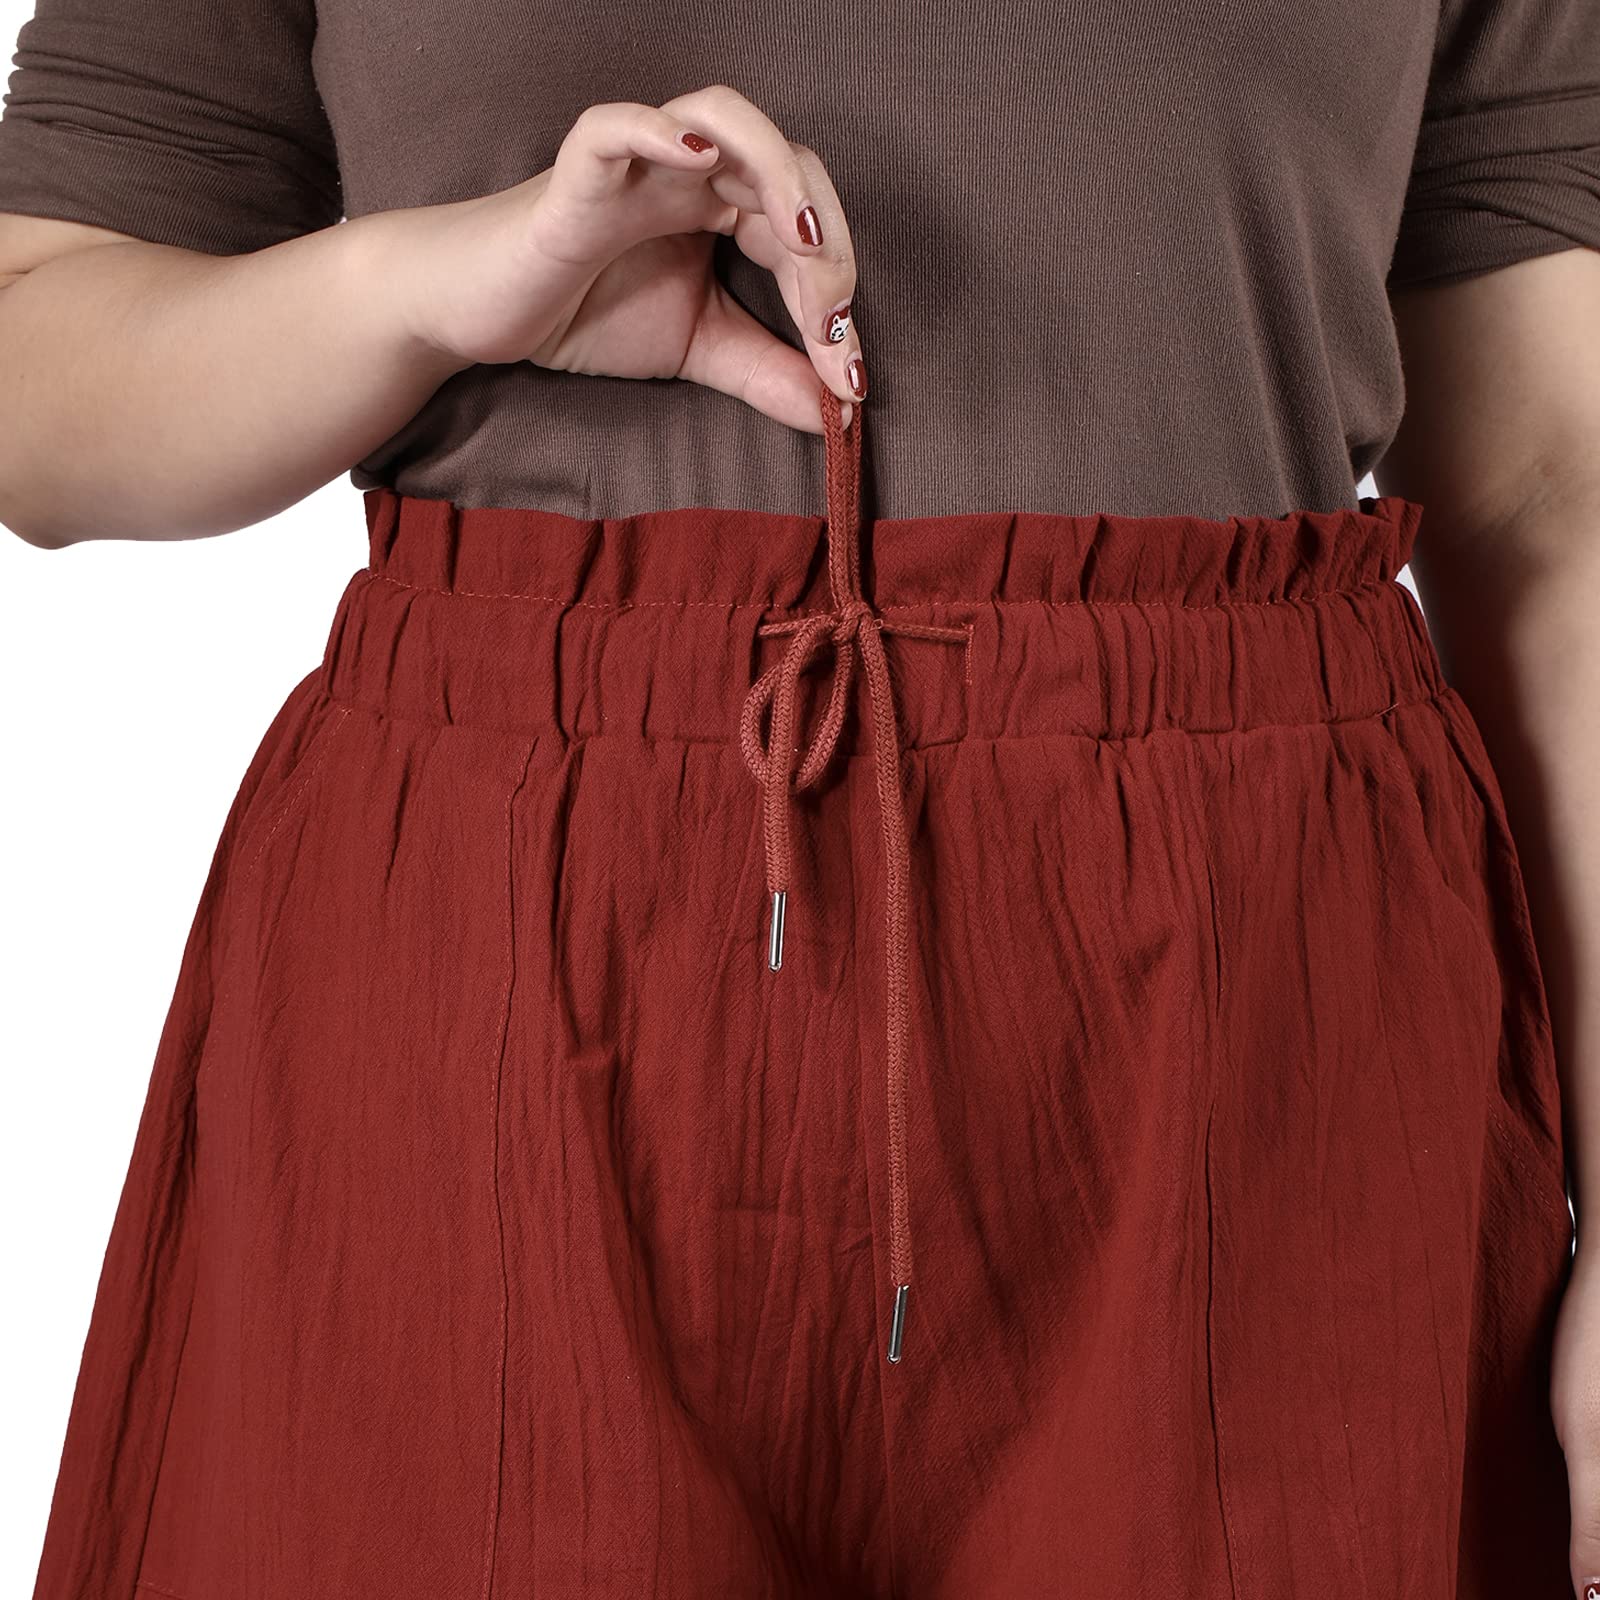 Linen High Waisted Pleated Drawstring Shorts Women's Plus Size Shorts-Red - Moon Wood